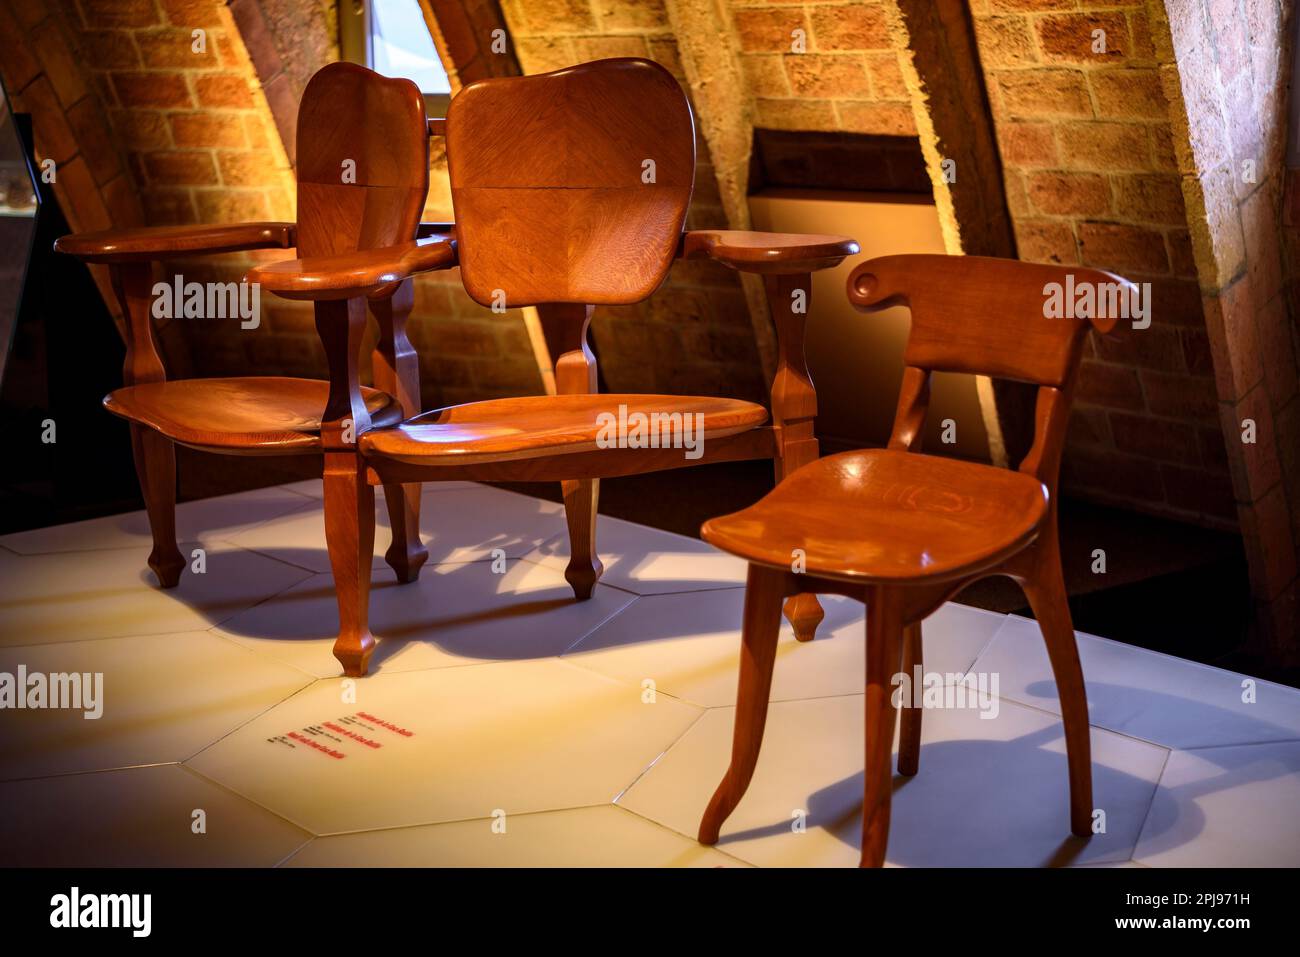 Chair designed by Antoni Gaudí for the Casa Batlló and exhibited in an exhibition inside Casa Milà - La Pedrera (Barcelona, Catalonia, Spain) Stock Photo